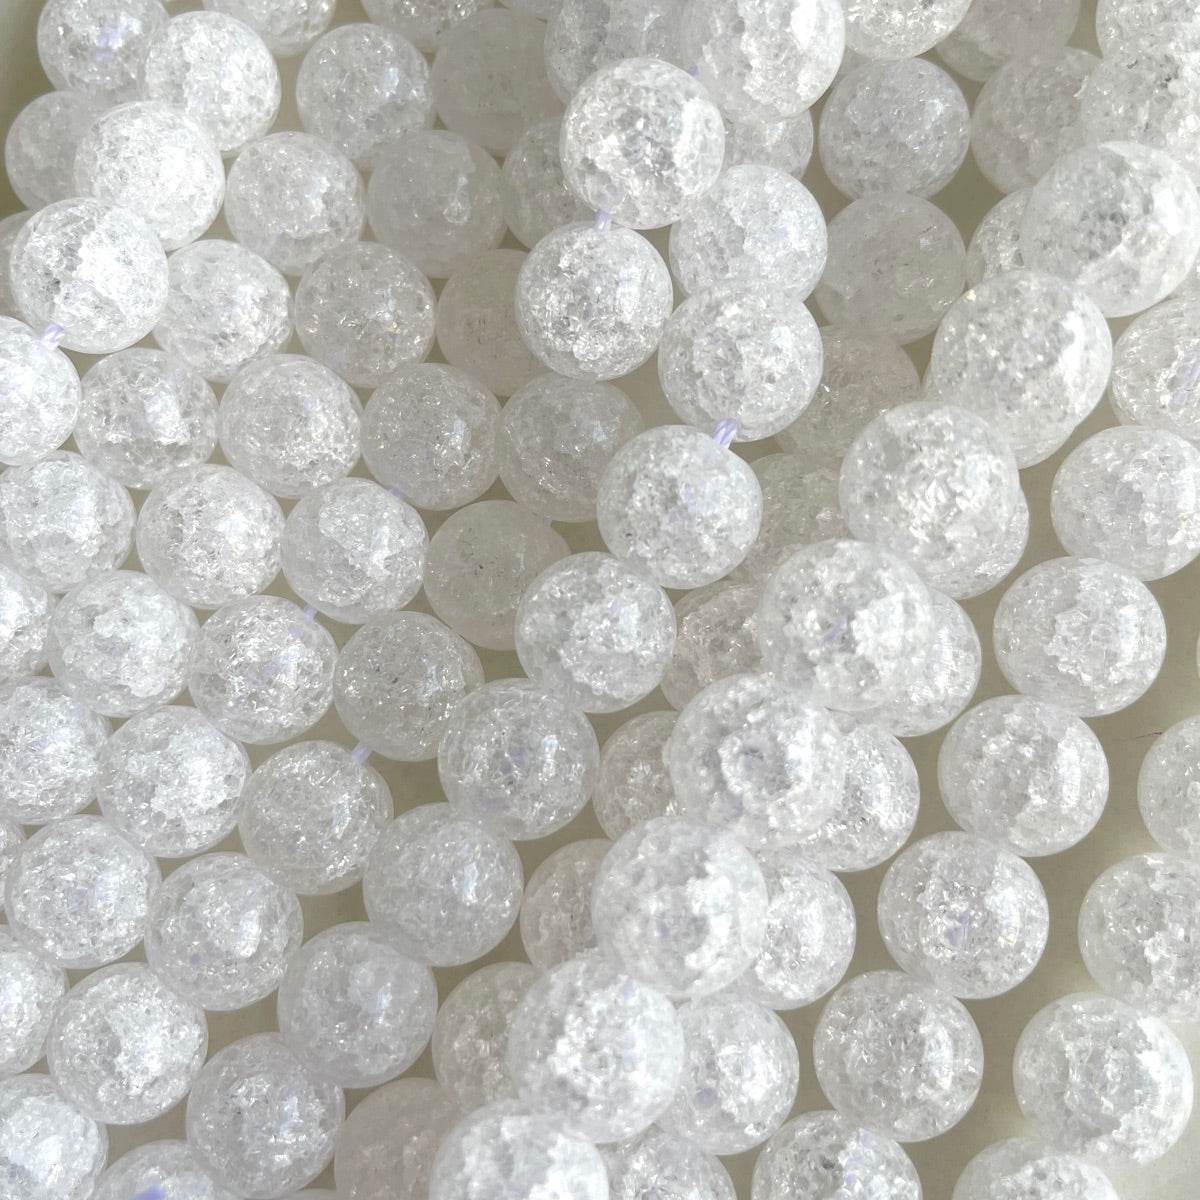 2 Strands/lot 10mm Colorful Popcorn Crystal Round Beads Clear White Stone Beads New Beads Arrivals Other Stone Beads Charms Beads Beyond